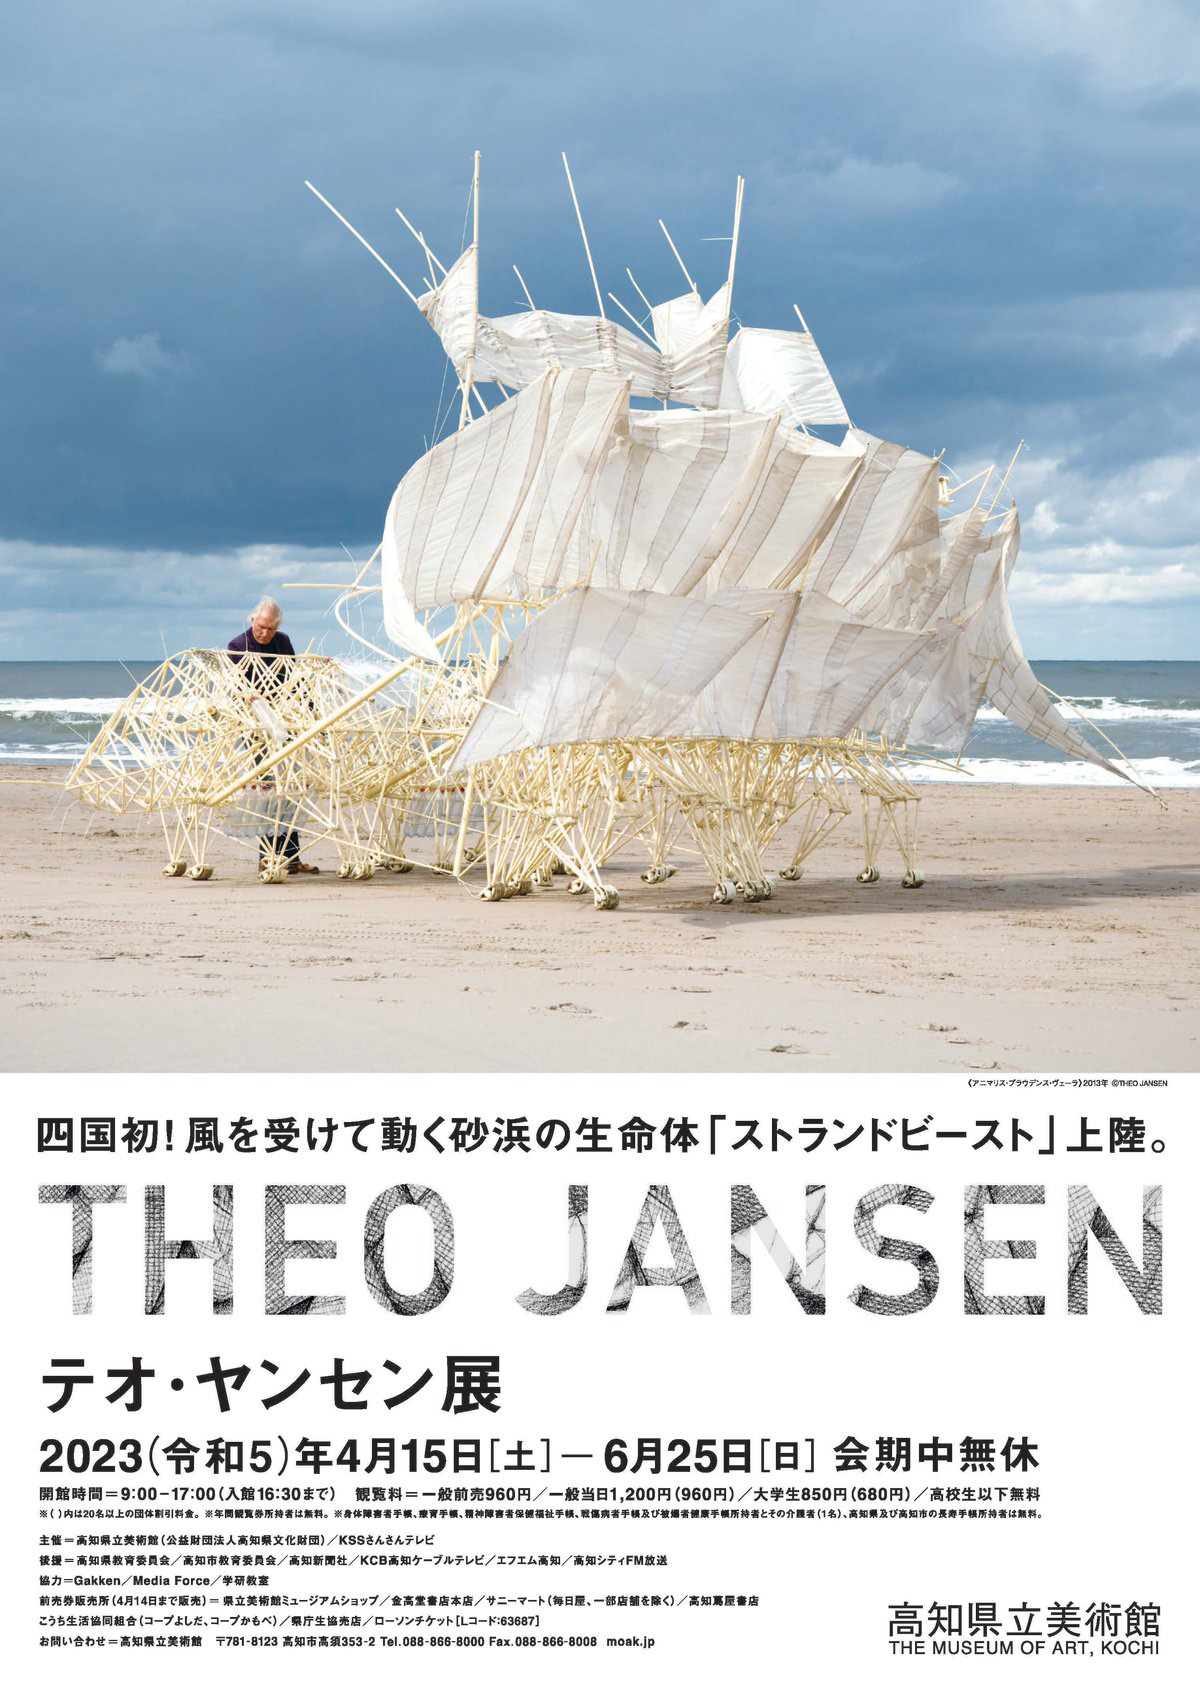 Poster of Theo Jansen Exhibition at The Museum of Art, Kochi (Japan), 2023